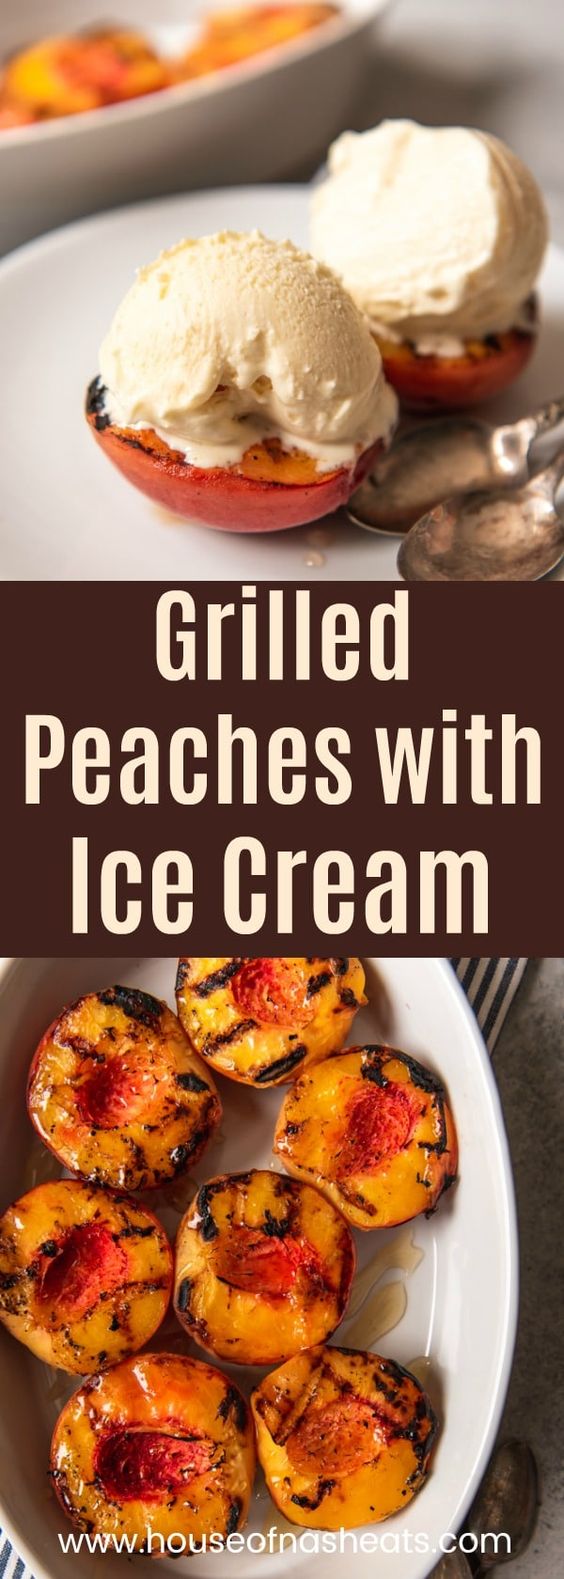 Grilled Peaches with Ice Cream is a perfectly sweet and juicy treat and one of the best summer dessert recipes to use this fantastic fruit from the farmer's market. #farmersmarketweek #farmersmarkets #farmersmarket #peaches #alamode #icecream #summer #grilled #grilling #easy #summer #fruit #recipe